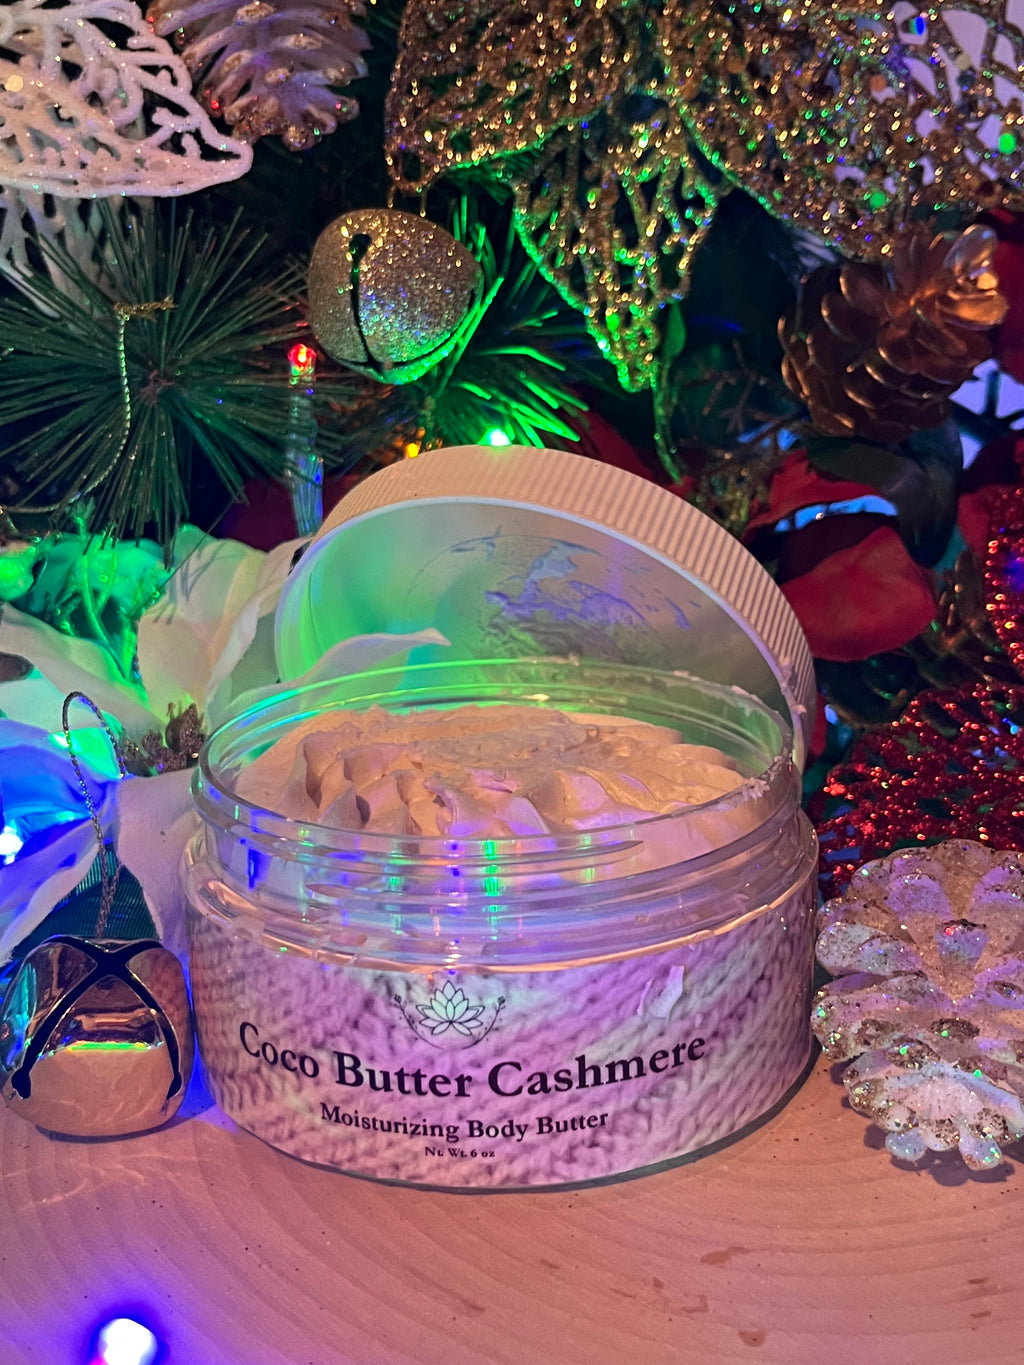 Coco Butter Cashmere Moisturizing Body Butter